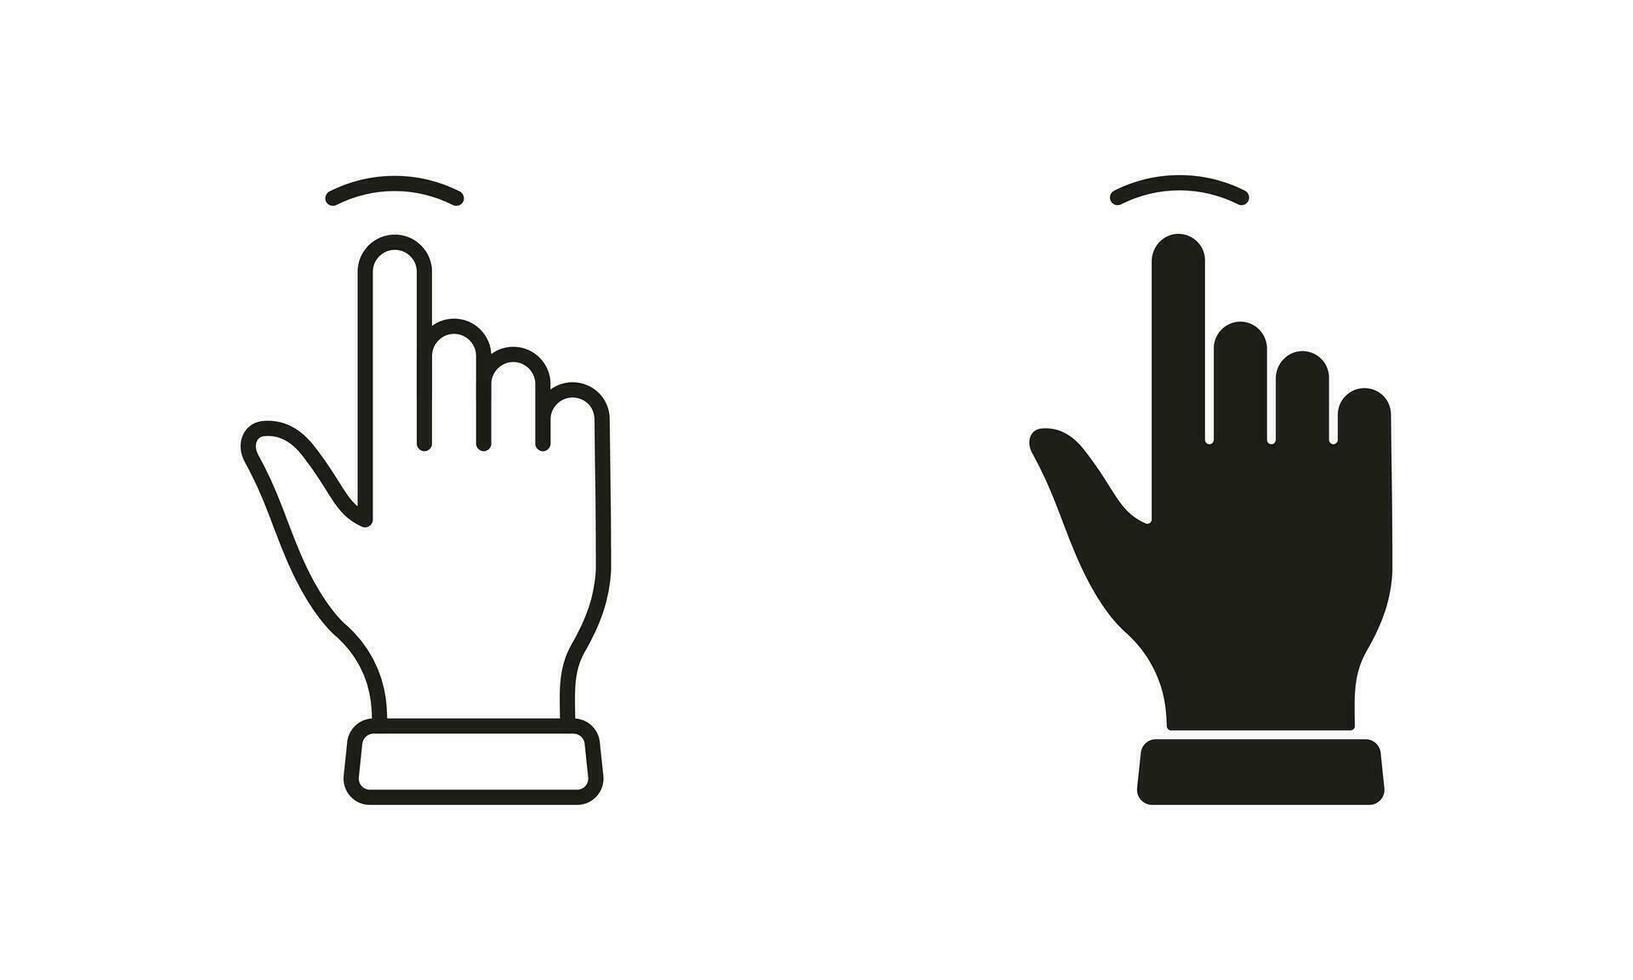 Tap Gesture, Hand Cursor of Computer Mouse Line and Silhouette Black Icon Set. Touch, Click, Press, Swipe, Point Symbol Collection. Pointer Finger Pictogram. Isolated Vector Illustration.